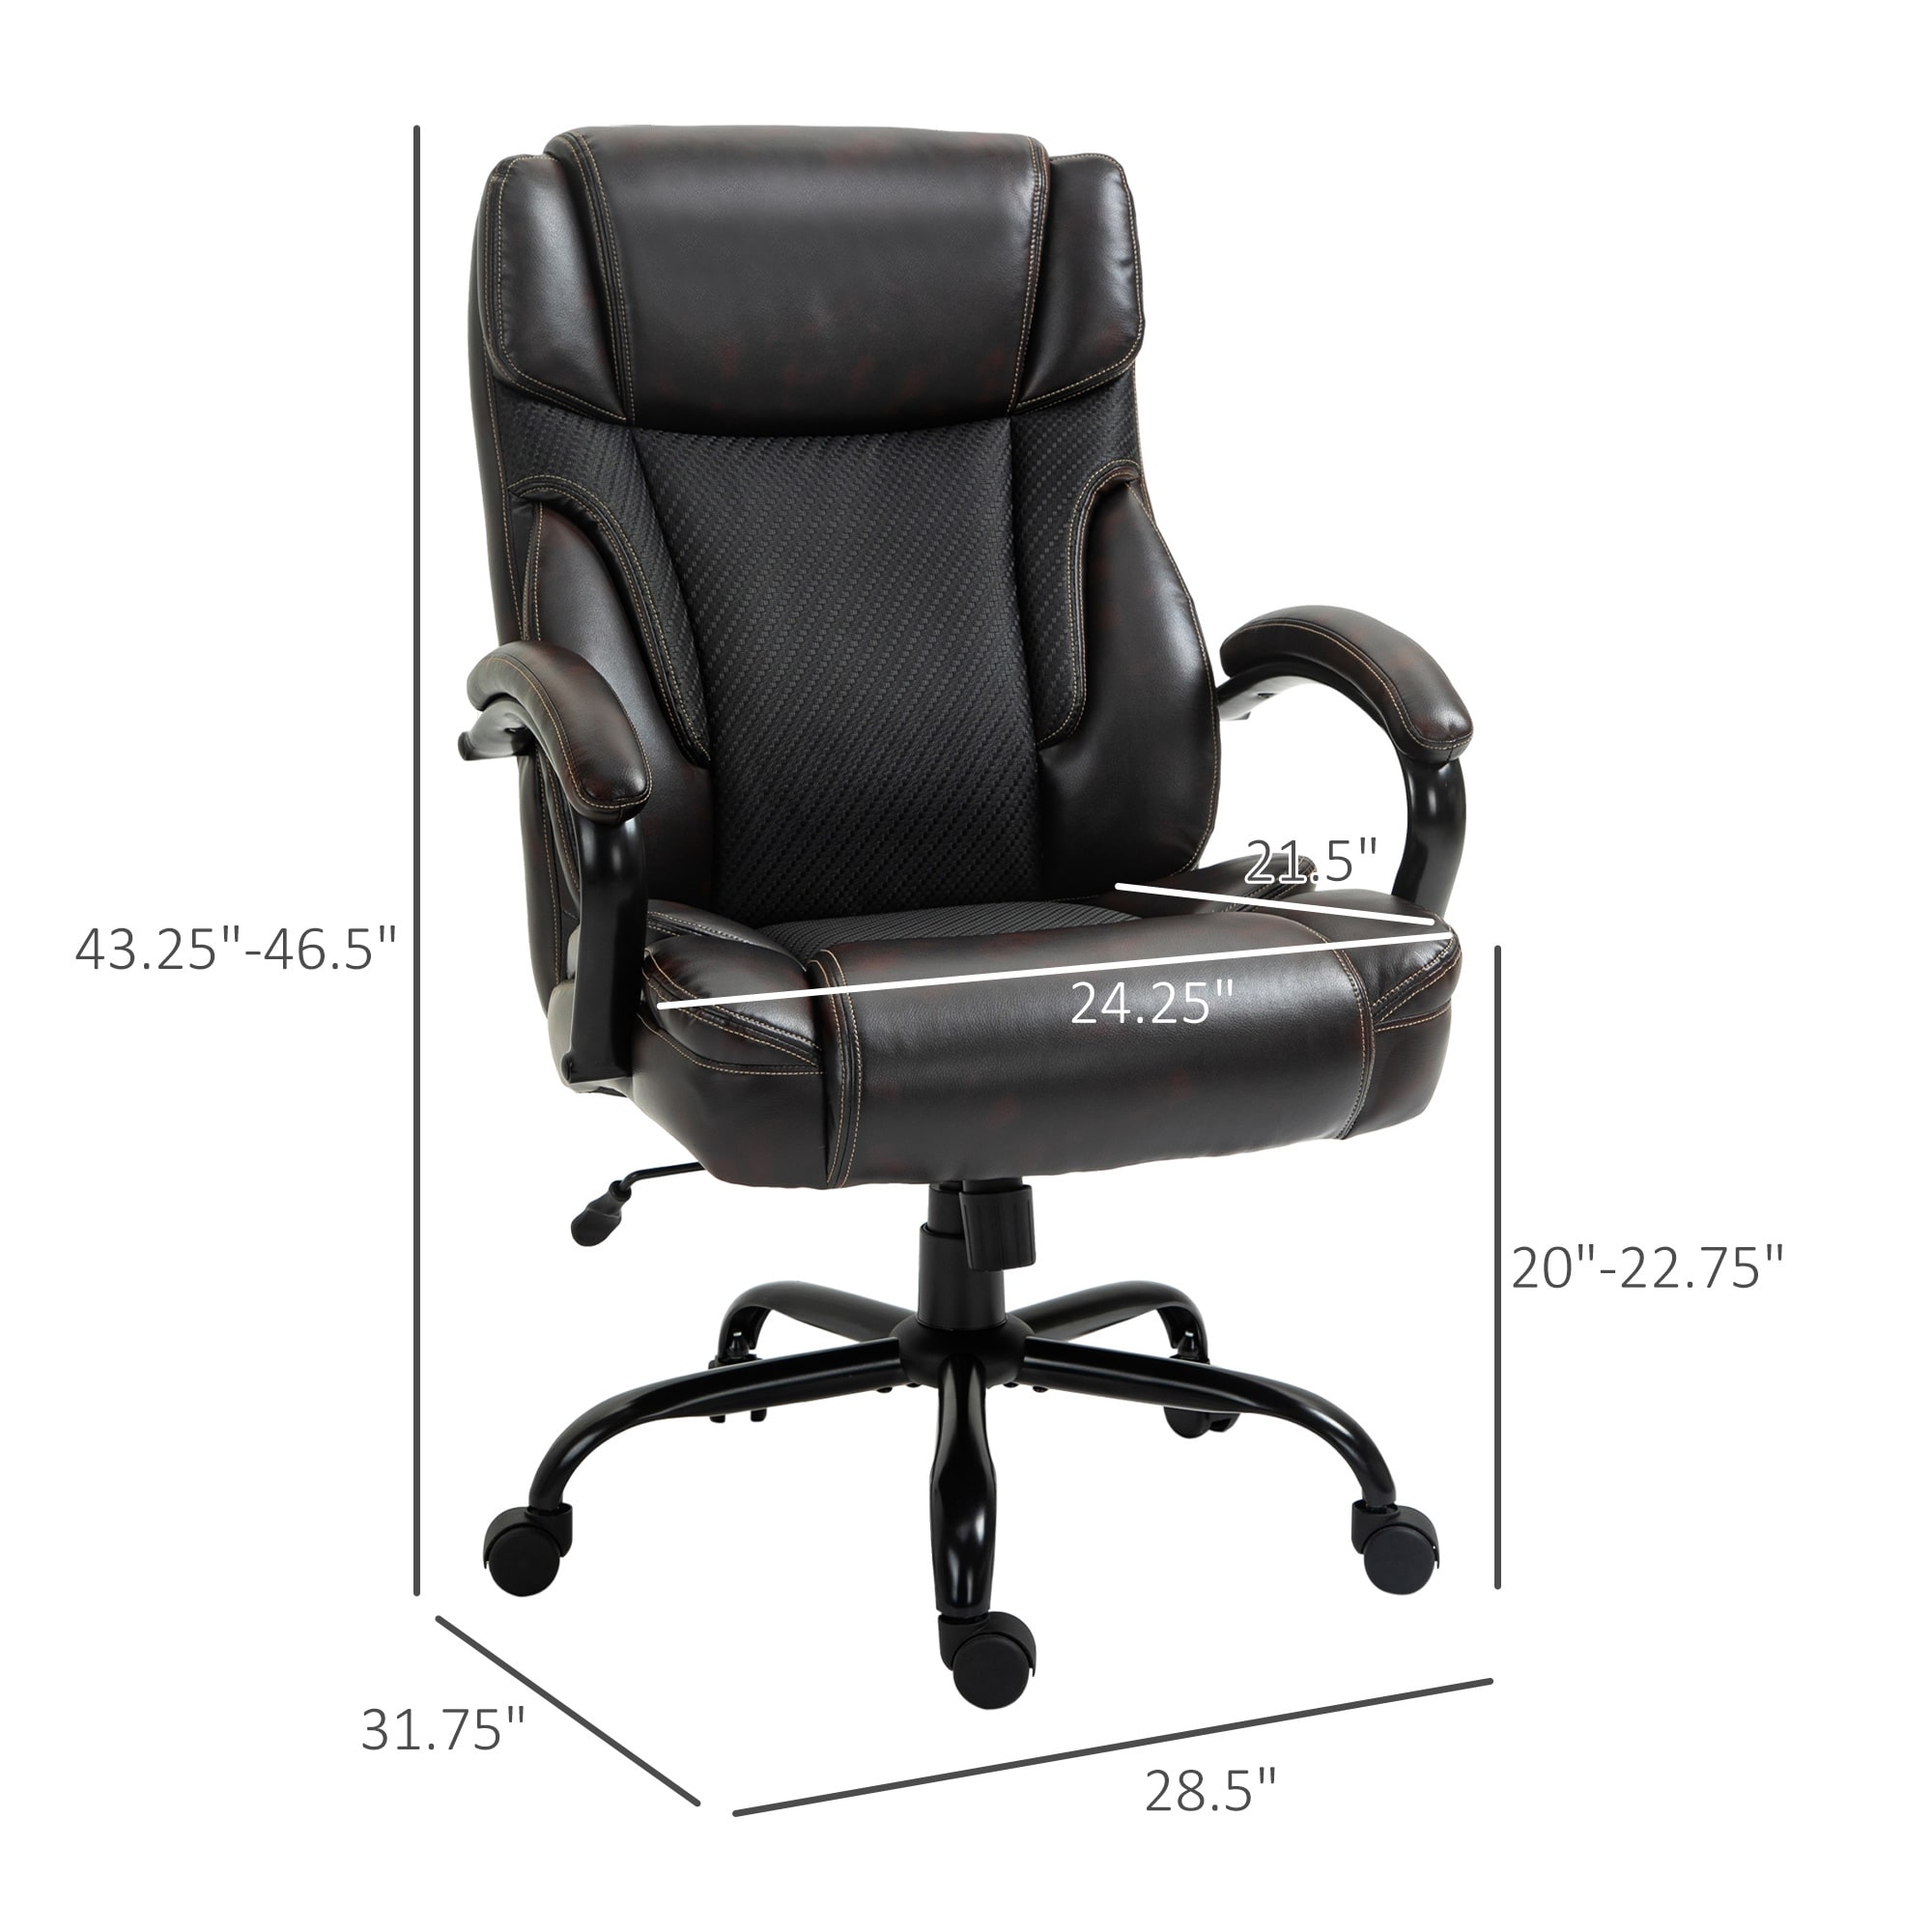 Vinsetto 484lbs Big and Tall Ergonomic Executive Office Chair High Back Adjustable Computer Task Chair Swivel PU Leather - Brown